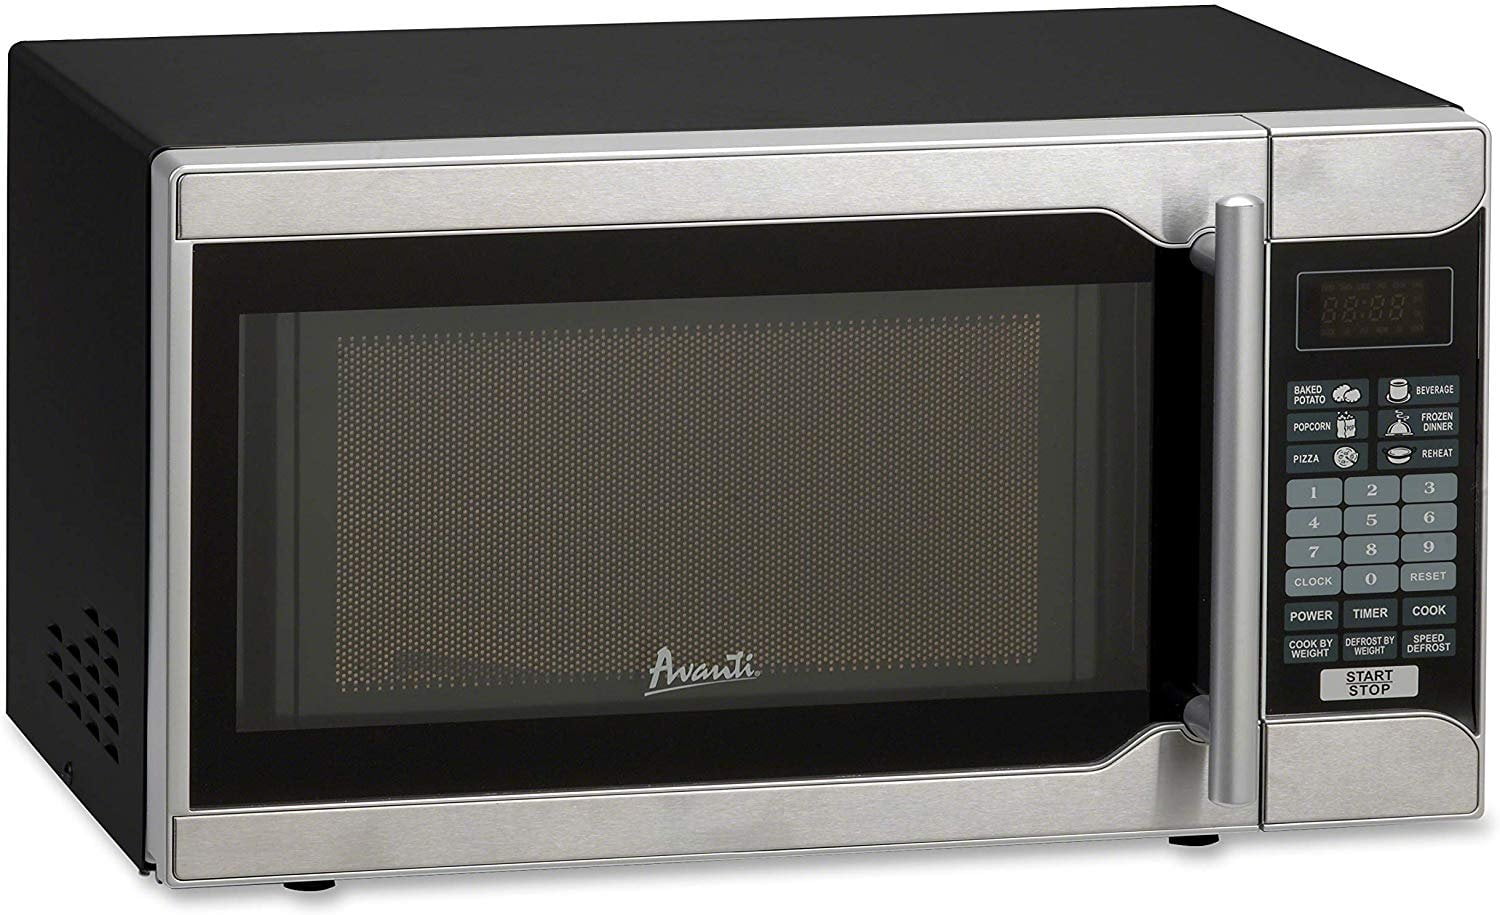 Avanti MO7103SST Counter Top Microwave Oven 0.7 Cu. Ft. Black/Stainless